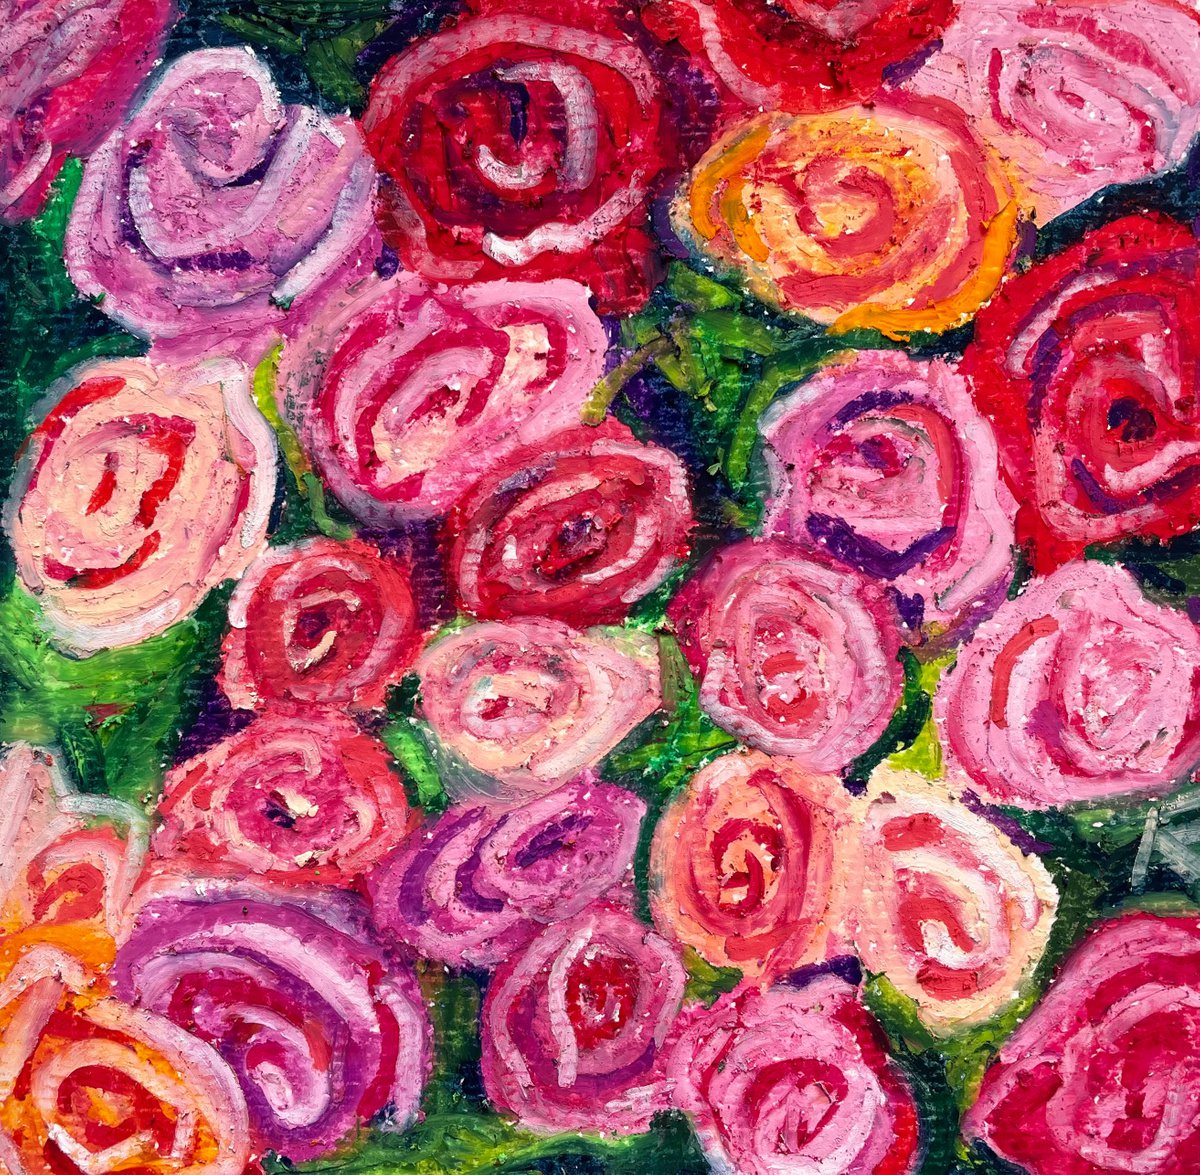 Rose Original Oil Pastel Painting, Valentines Day Gift, Hand Painted Card, Gifts for Her by Kate Grishakova